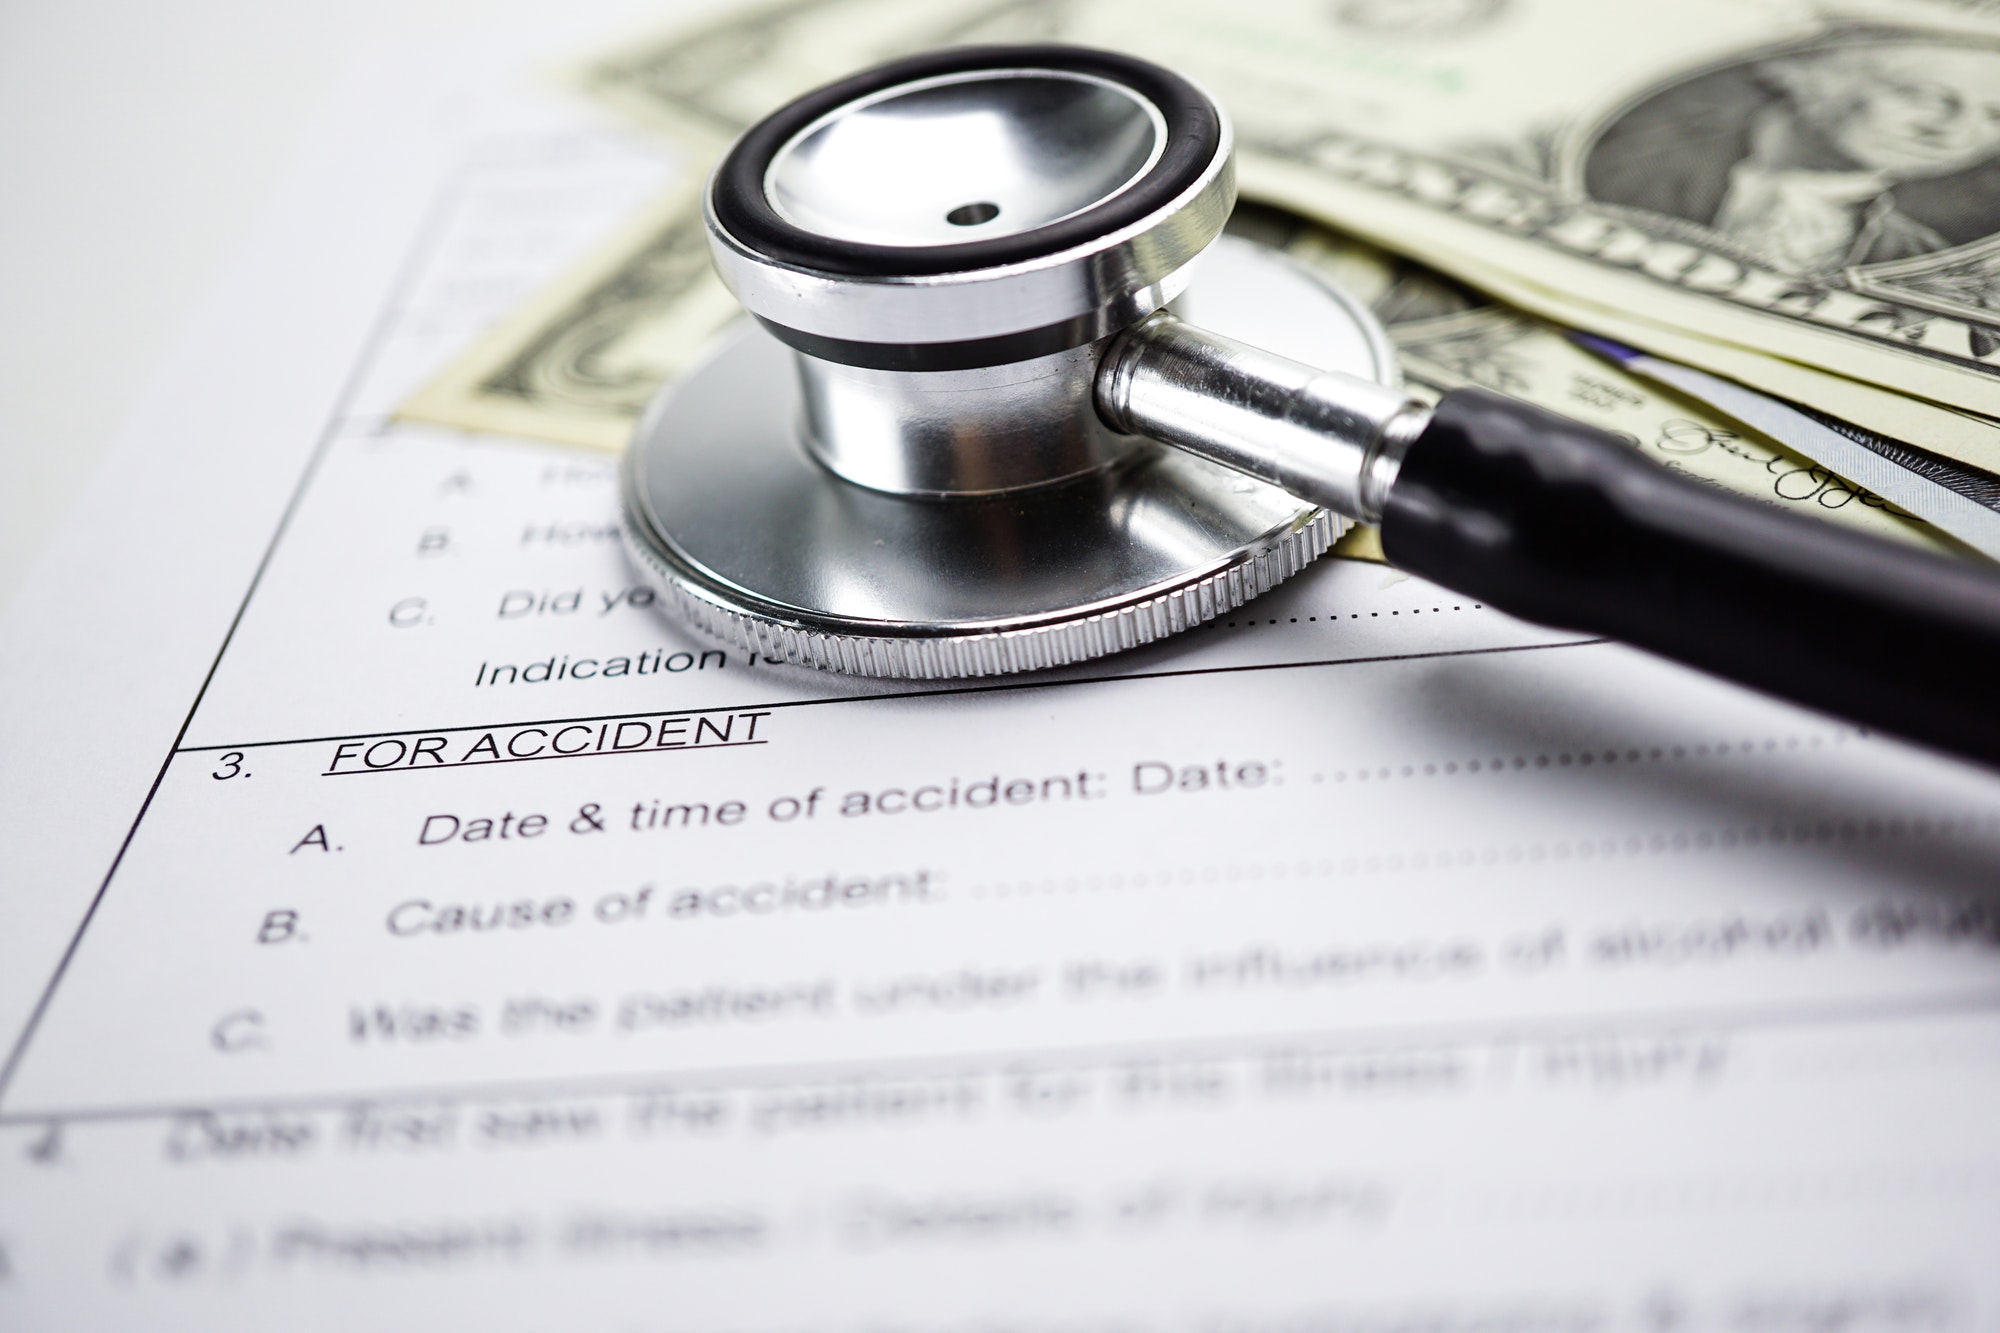 Health insurance accident claim form with stethoscope and US dollar banknotes, Medical concept.